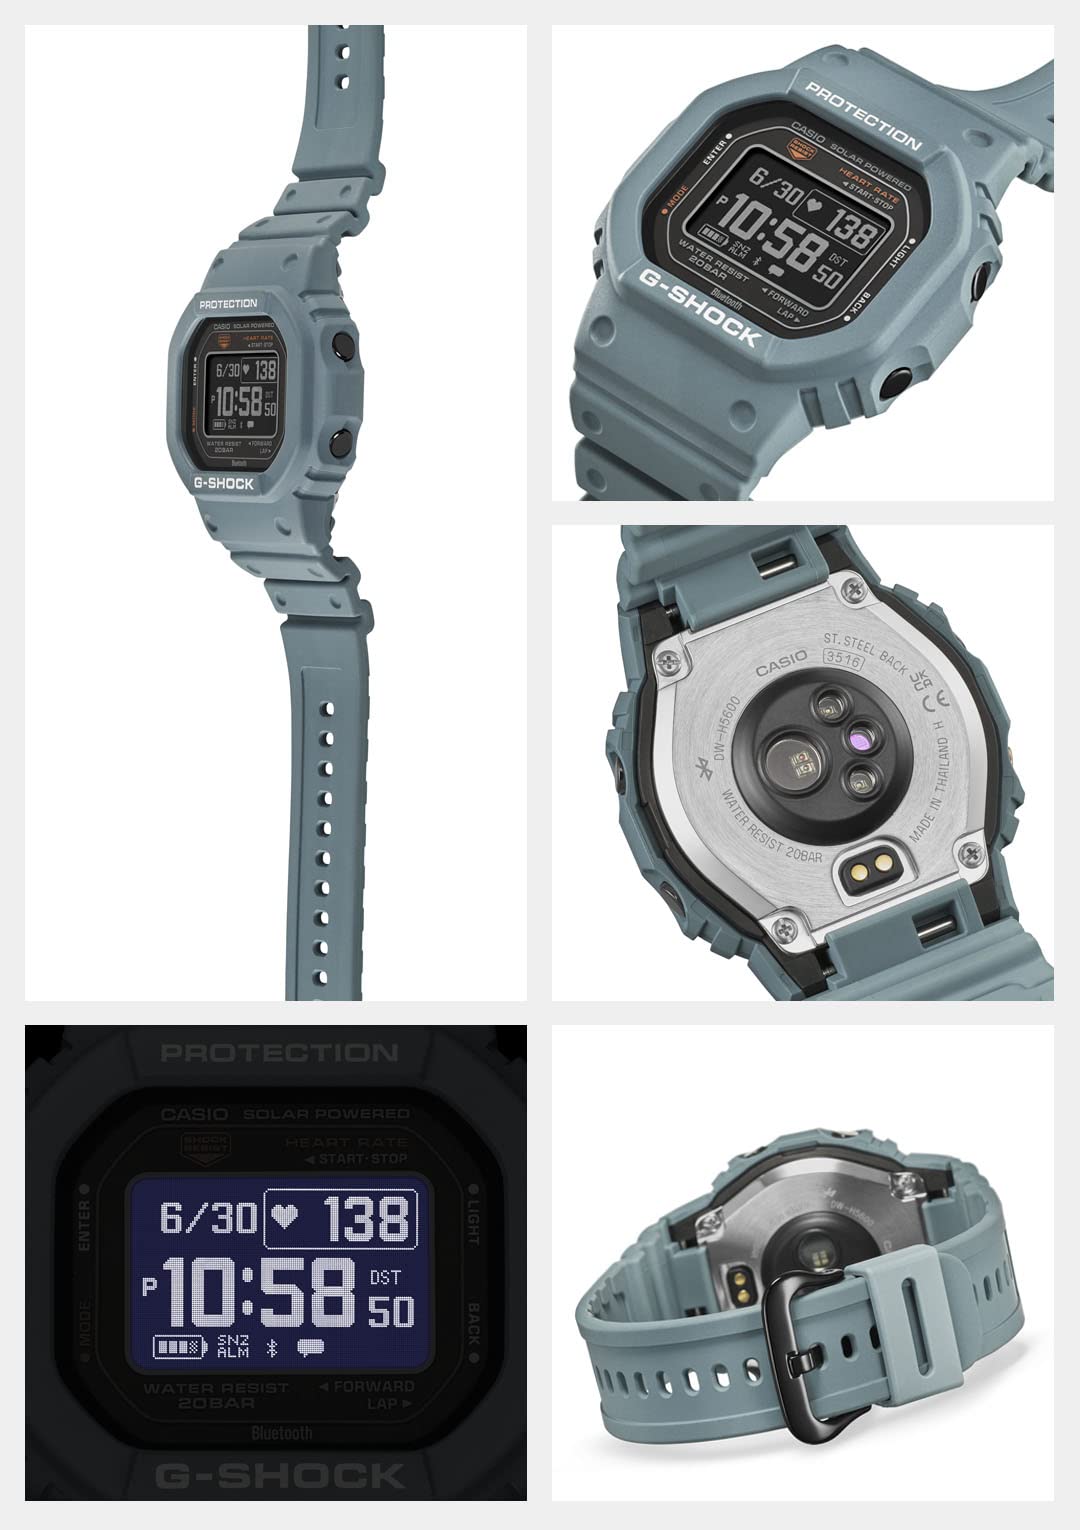 [Casio] G-Shock Watch [Domestic Genuine Product] G-SQUAD Heart Rate Monitor with Bluetooth DW-H5600-2JR Men's Pale Blue - BanzaiHobby